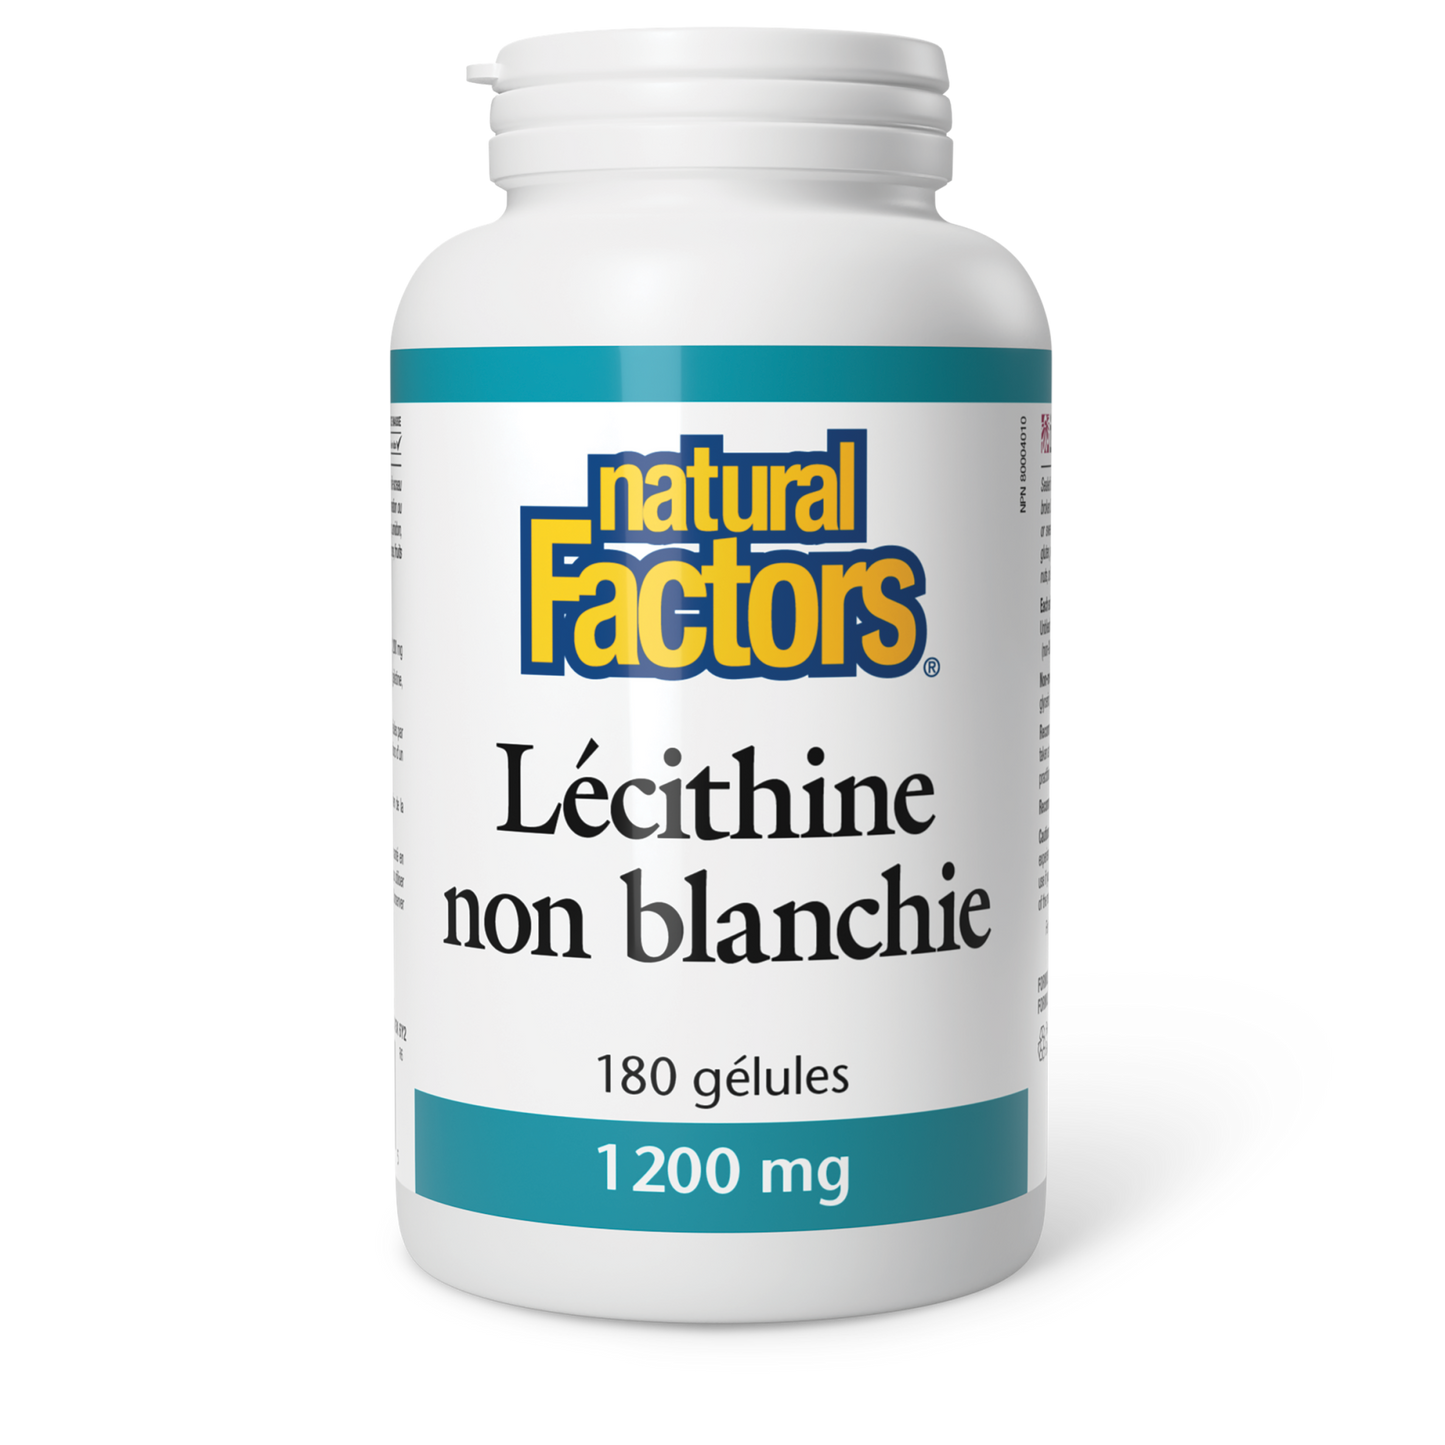 Lécithine non blanchie 1 200 mg, Natural Factors|v|image|2601